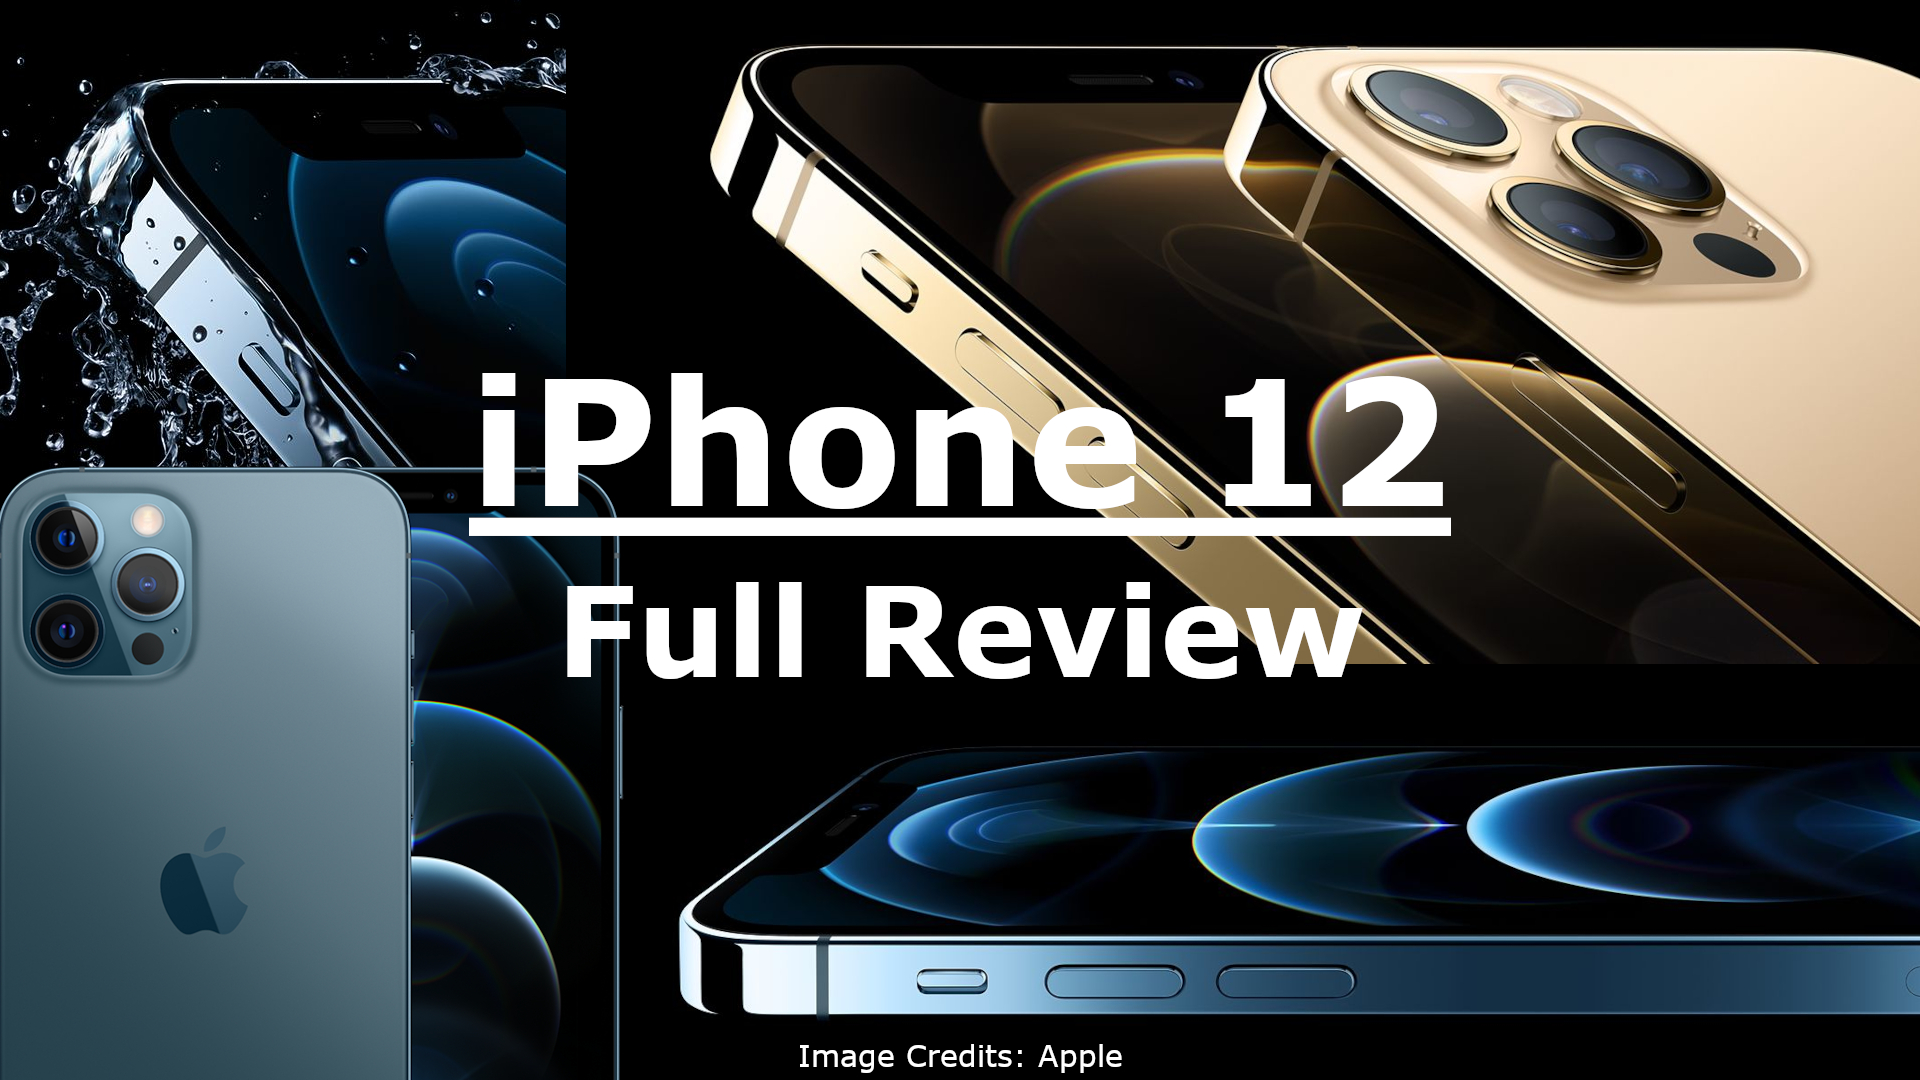 Apple iPhone 12 Full Review 2021